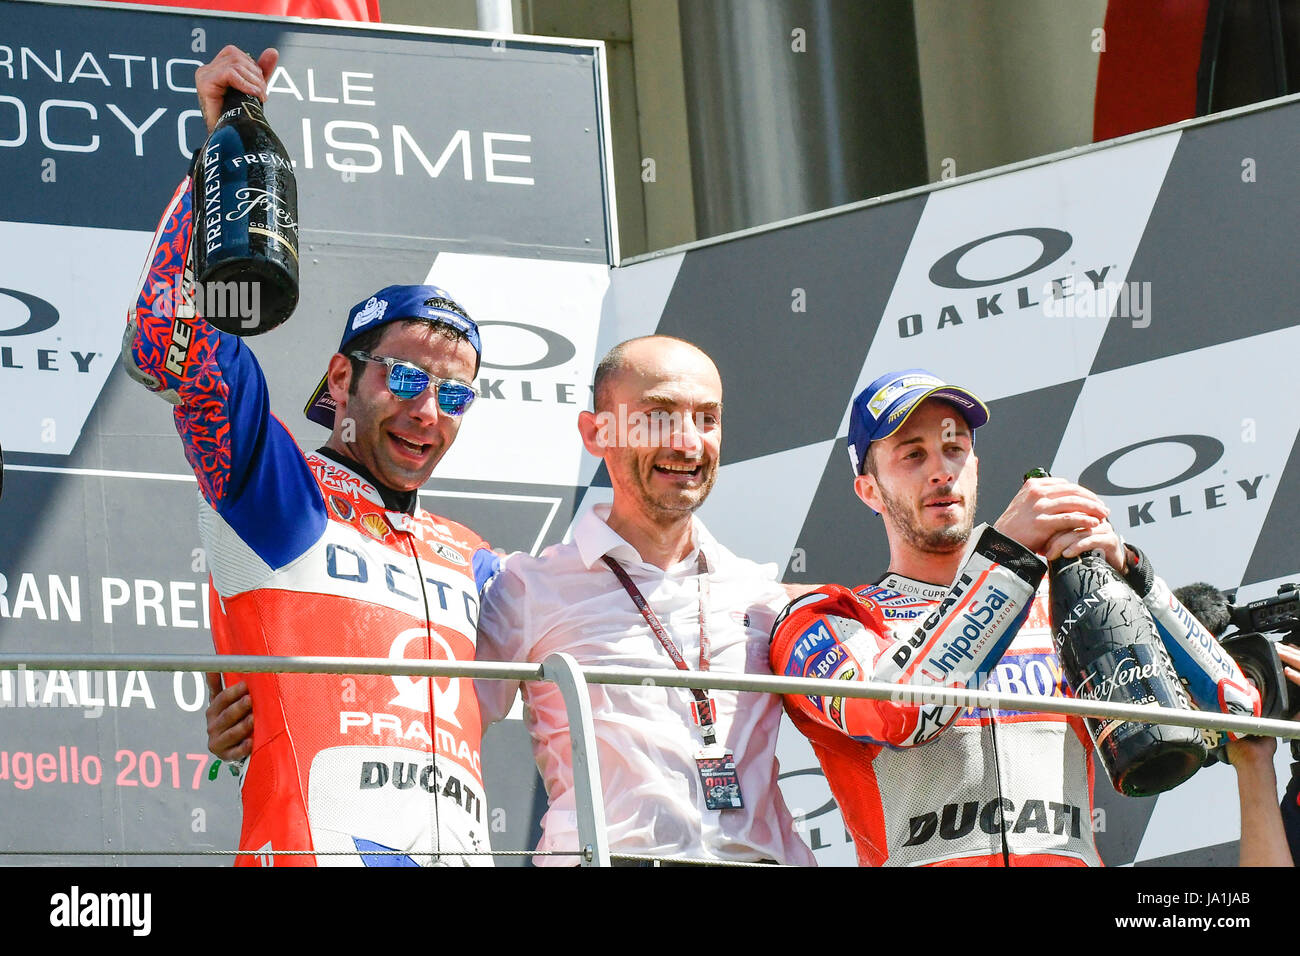 Florence, Italy. 04th June, 2017. SCARPERIA, FLORENCE, ITALY - JUNE 04:, 2017 Andrea Dovizioso (R) of Italy and Ducati Team, Claudio Domenicali (C) of Italy Ducati engineer and Danilo Petrucci (L) of Italy and OCTO Pramac Racing celebrates on the podium at the end race MotoGP during MotoGP Gran Premio d'Italia- at Mugello Circuit. on june 04, 2017 in Scarperia Italy. (Photo by Marco Iorio) Credit: marco iorio/Alamy Live News Stock Photo